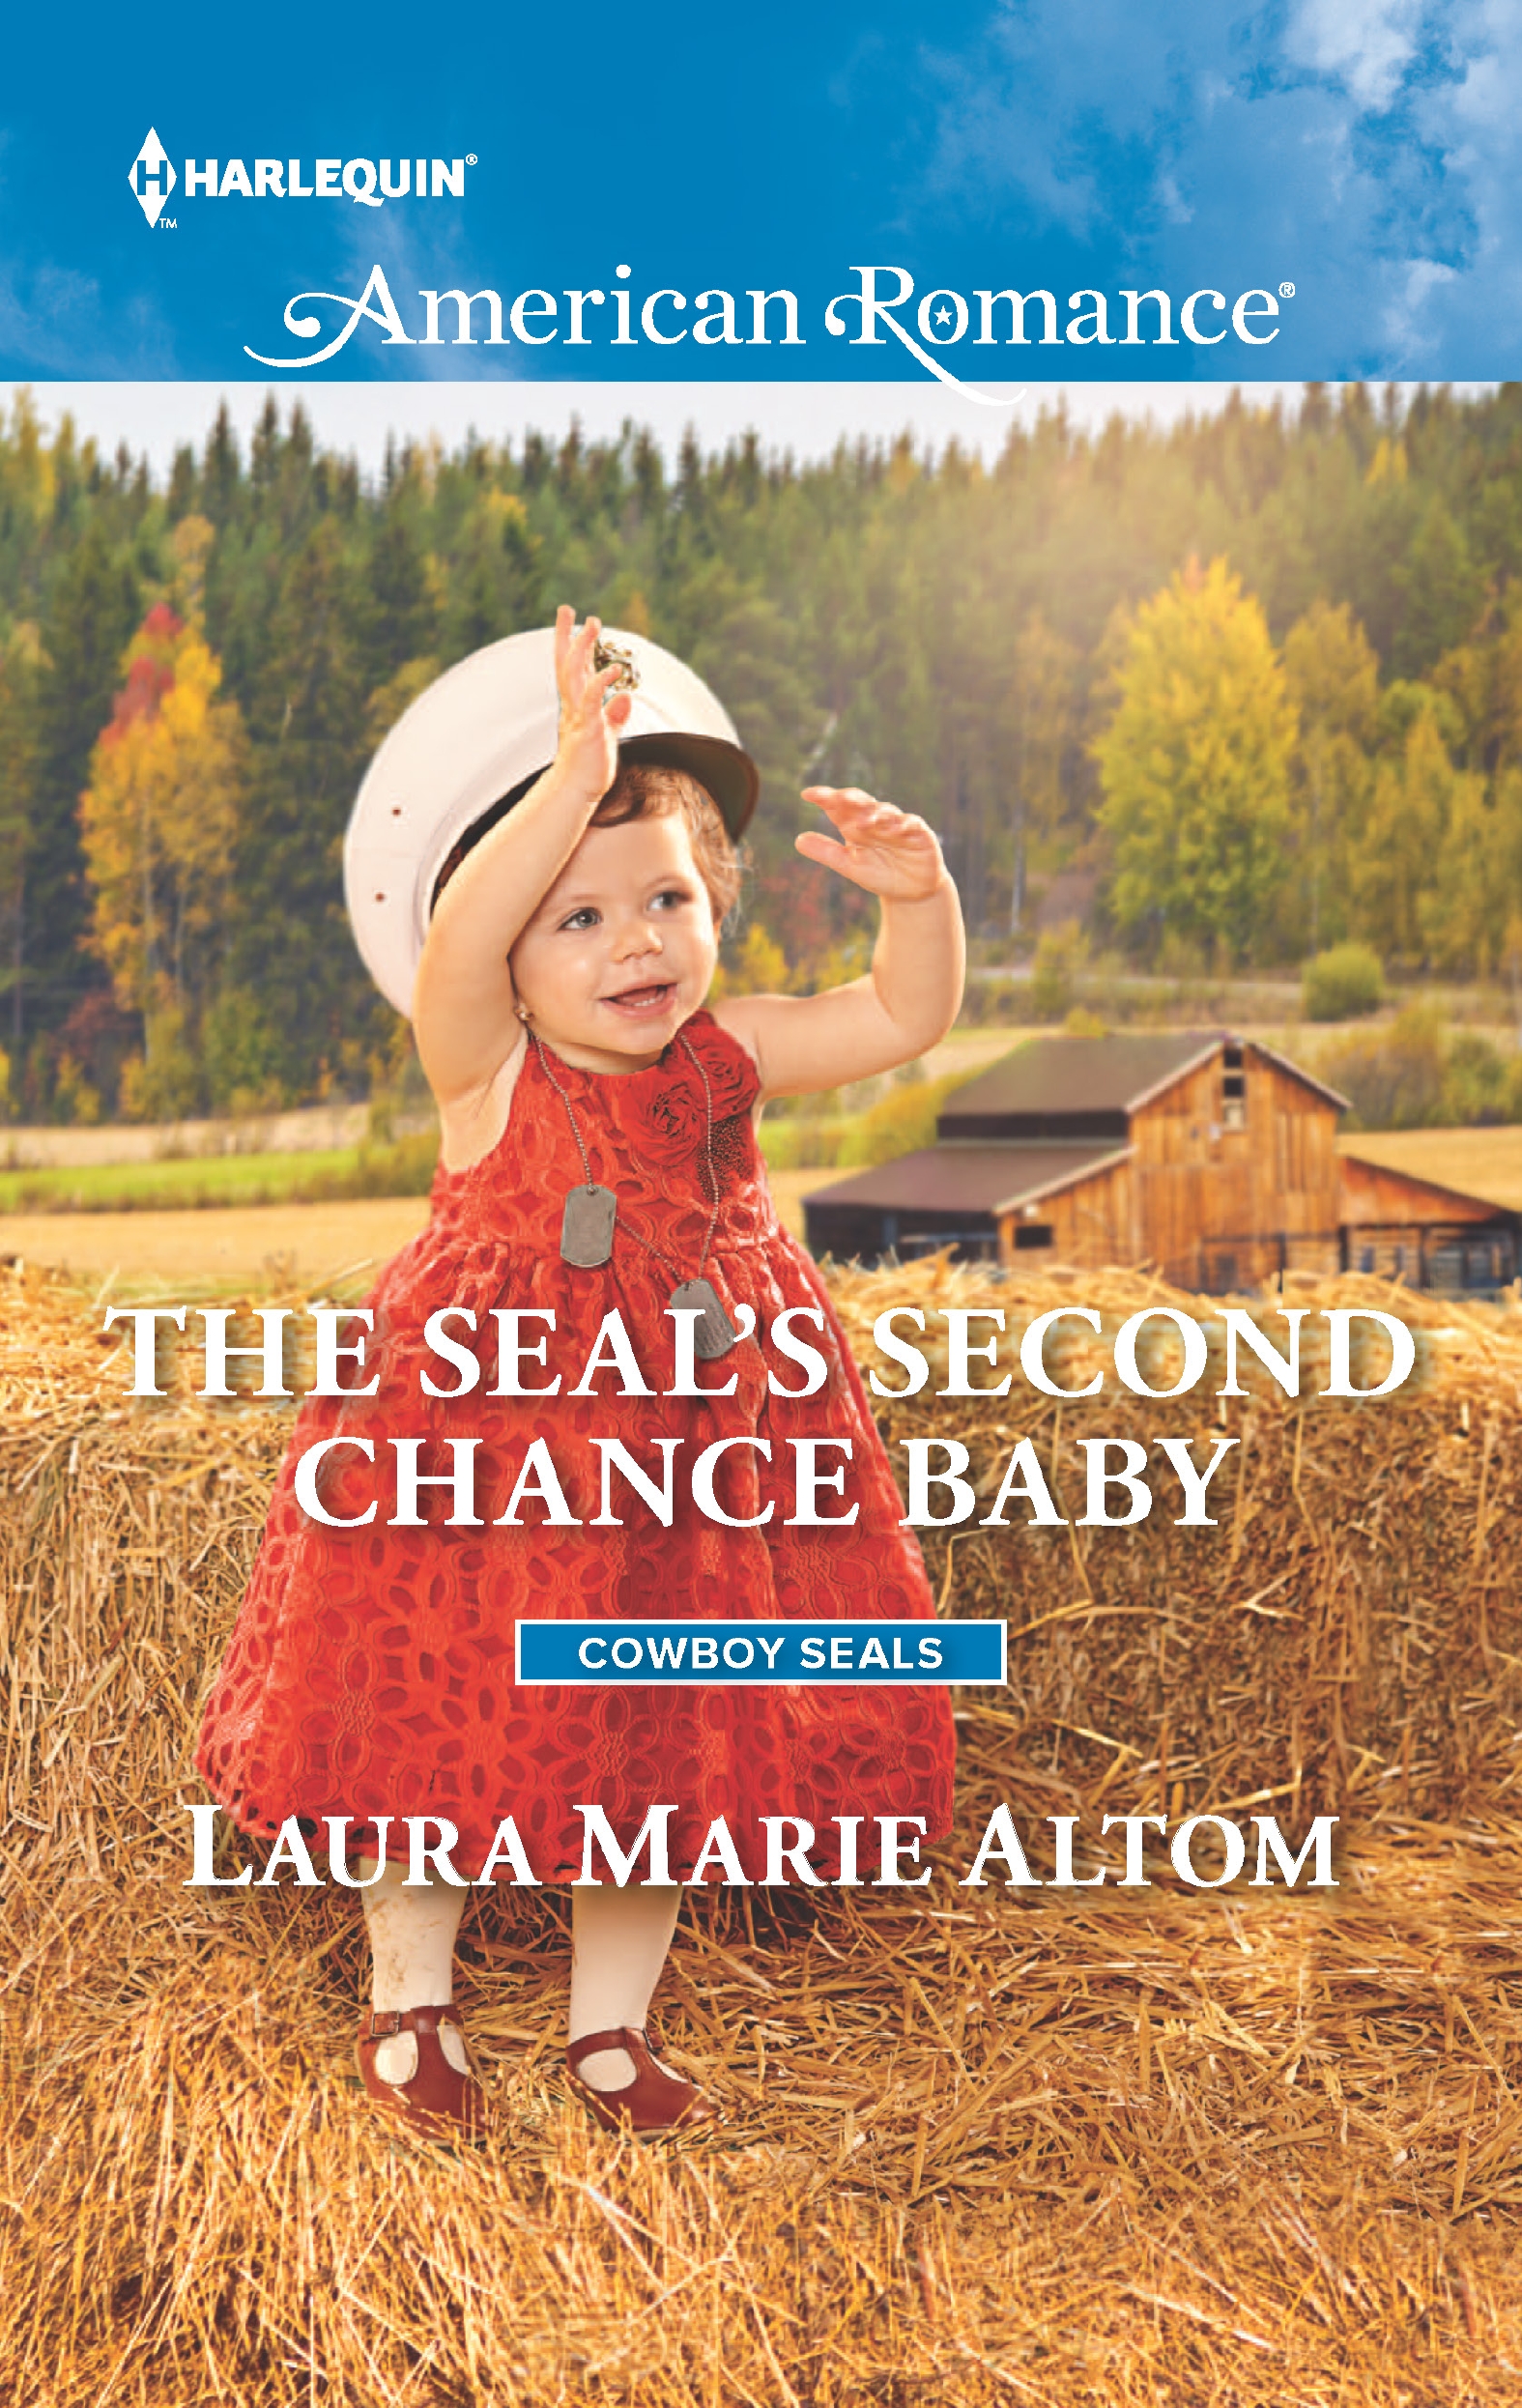 Read online "The SEAL's Second Chance Baby" |FREE BOOK ...